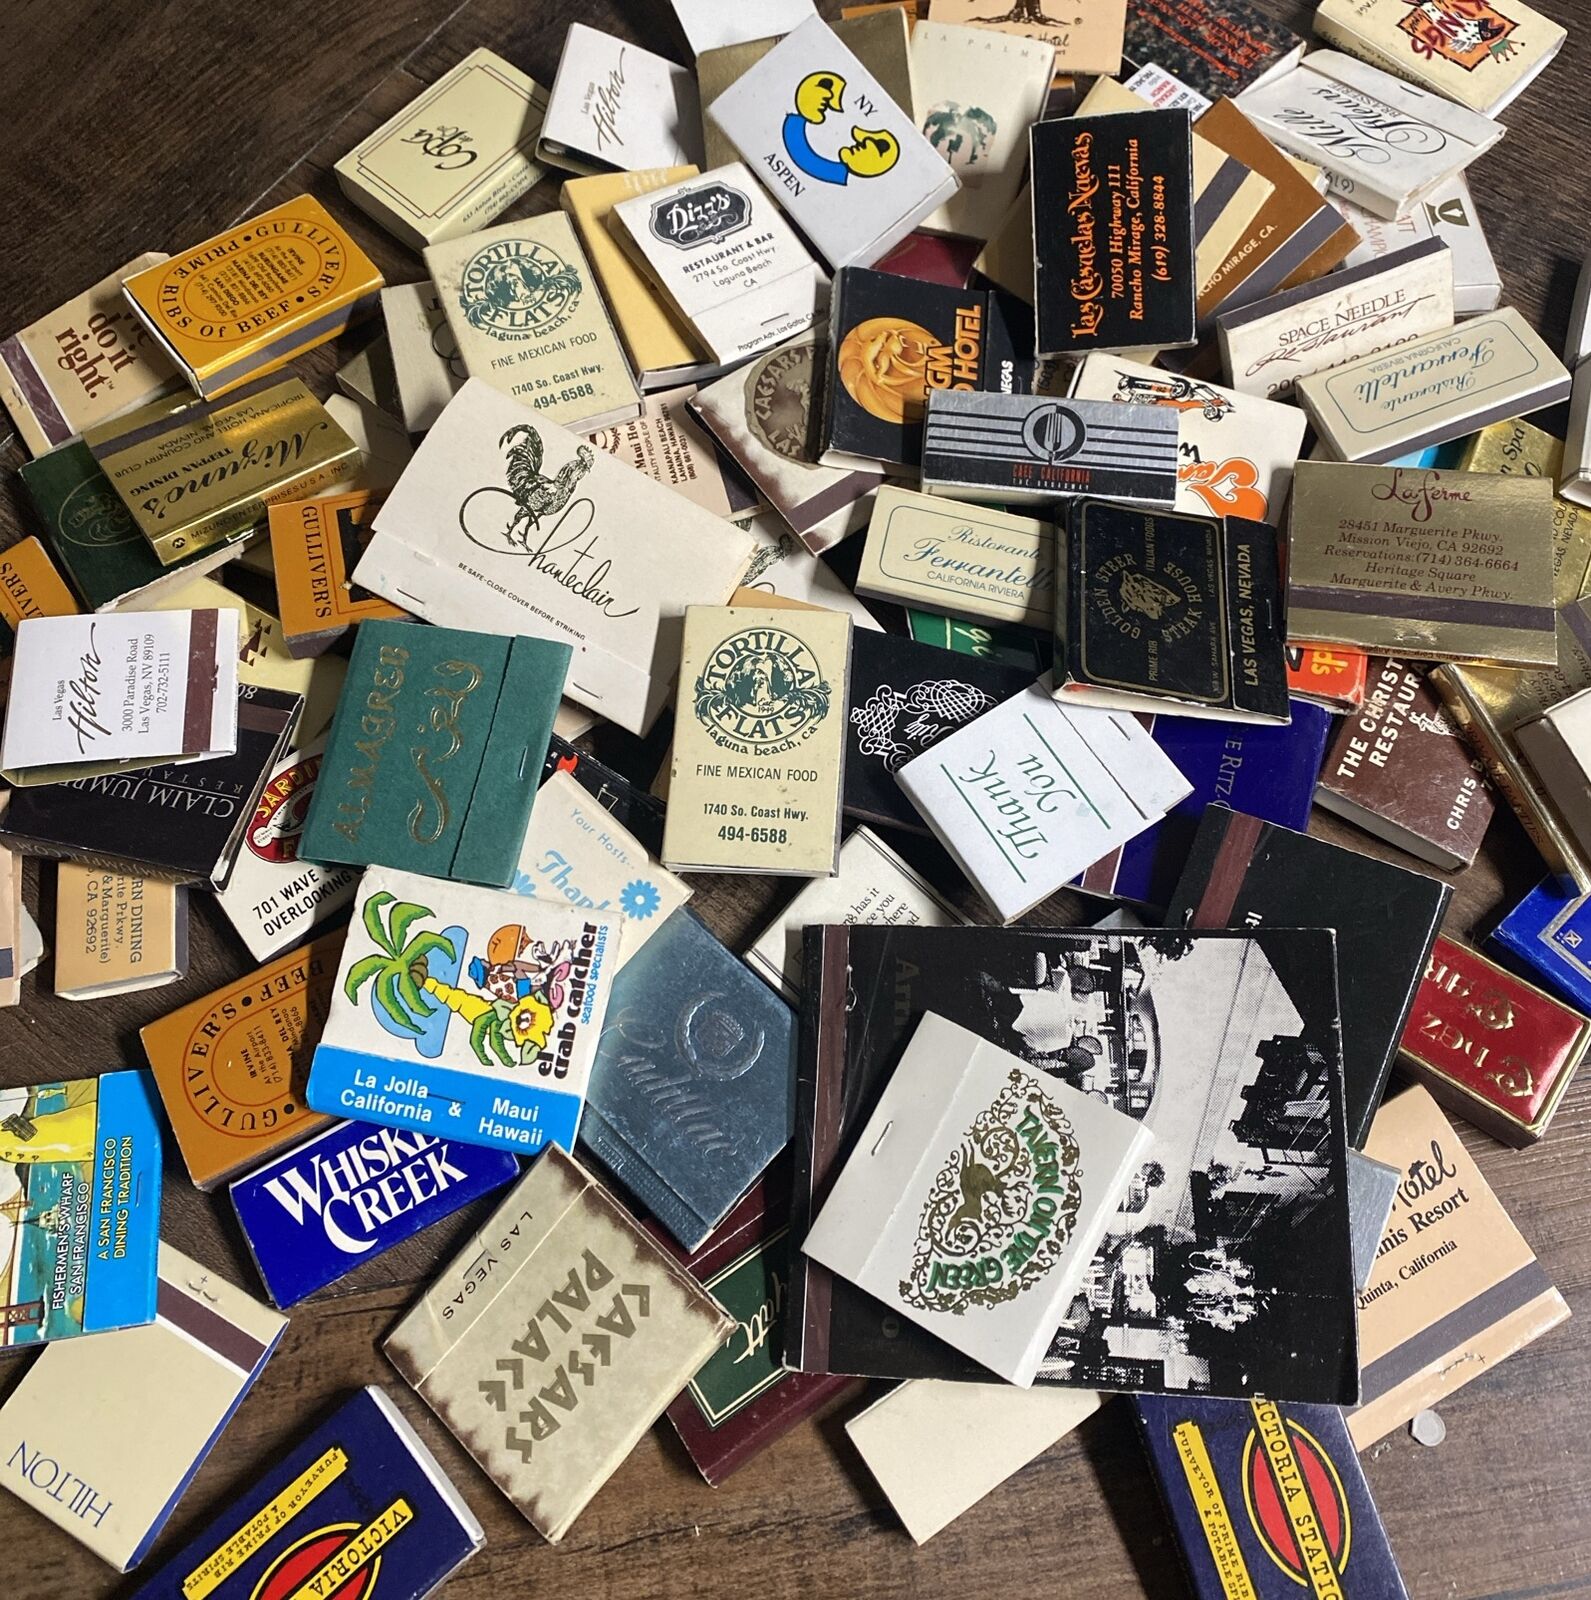 LOT OF 100 UNSTRUCK VINTAGE MATCHBOOKS & BOXES NEVADA, SOUTHERN CALIFORNIA AREA